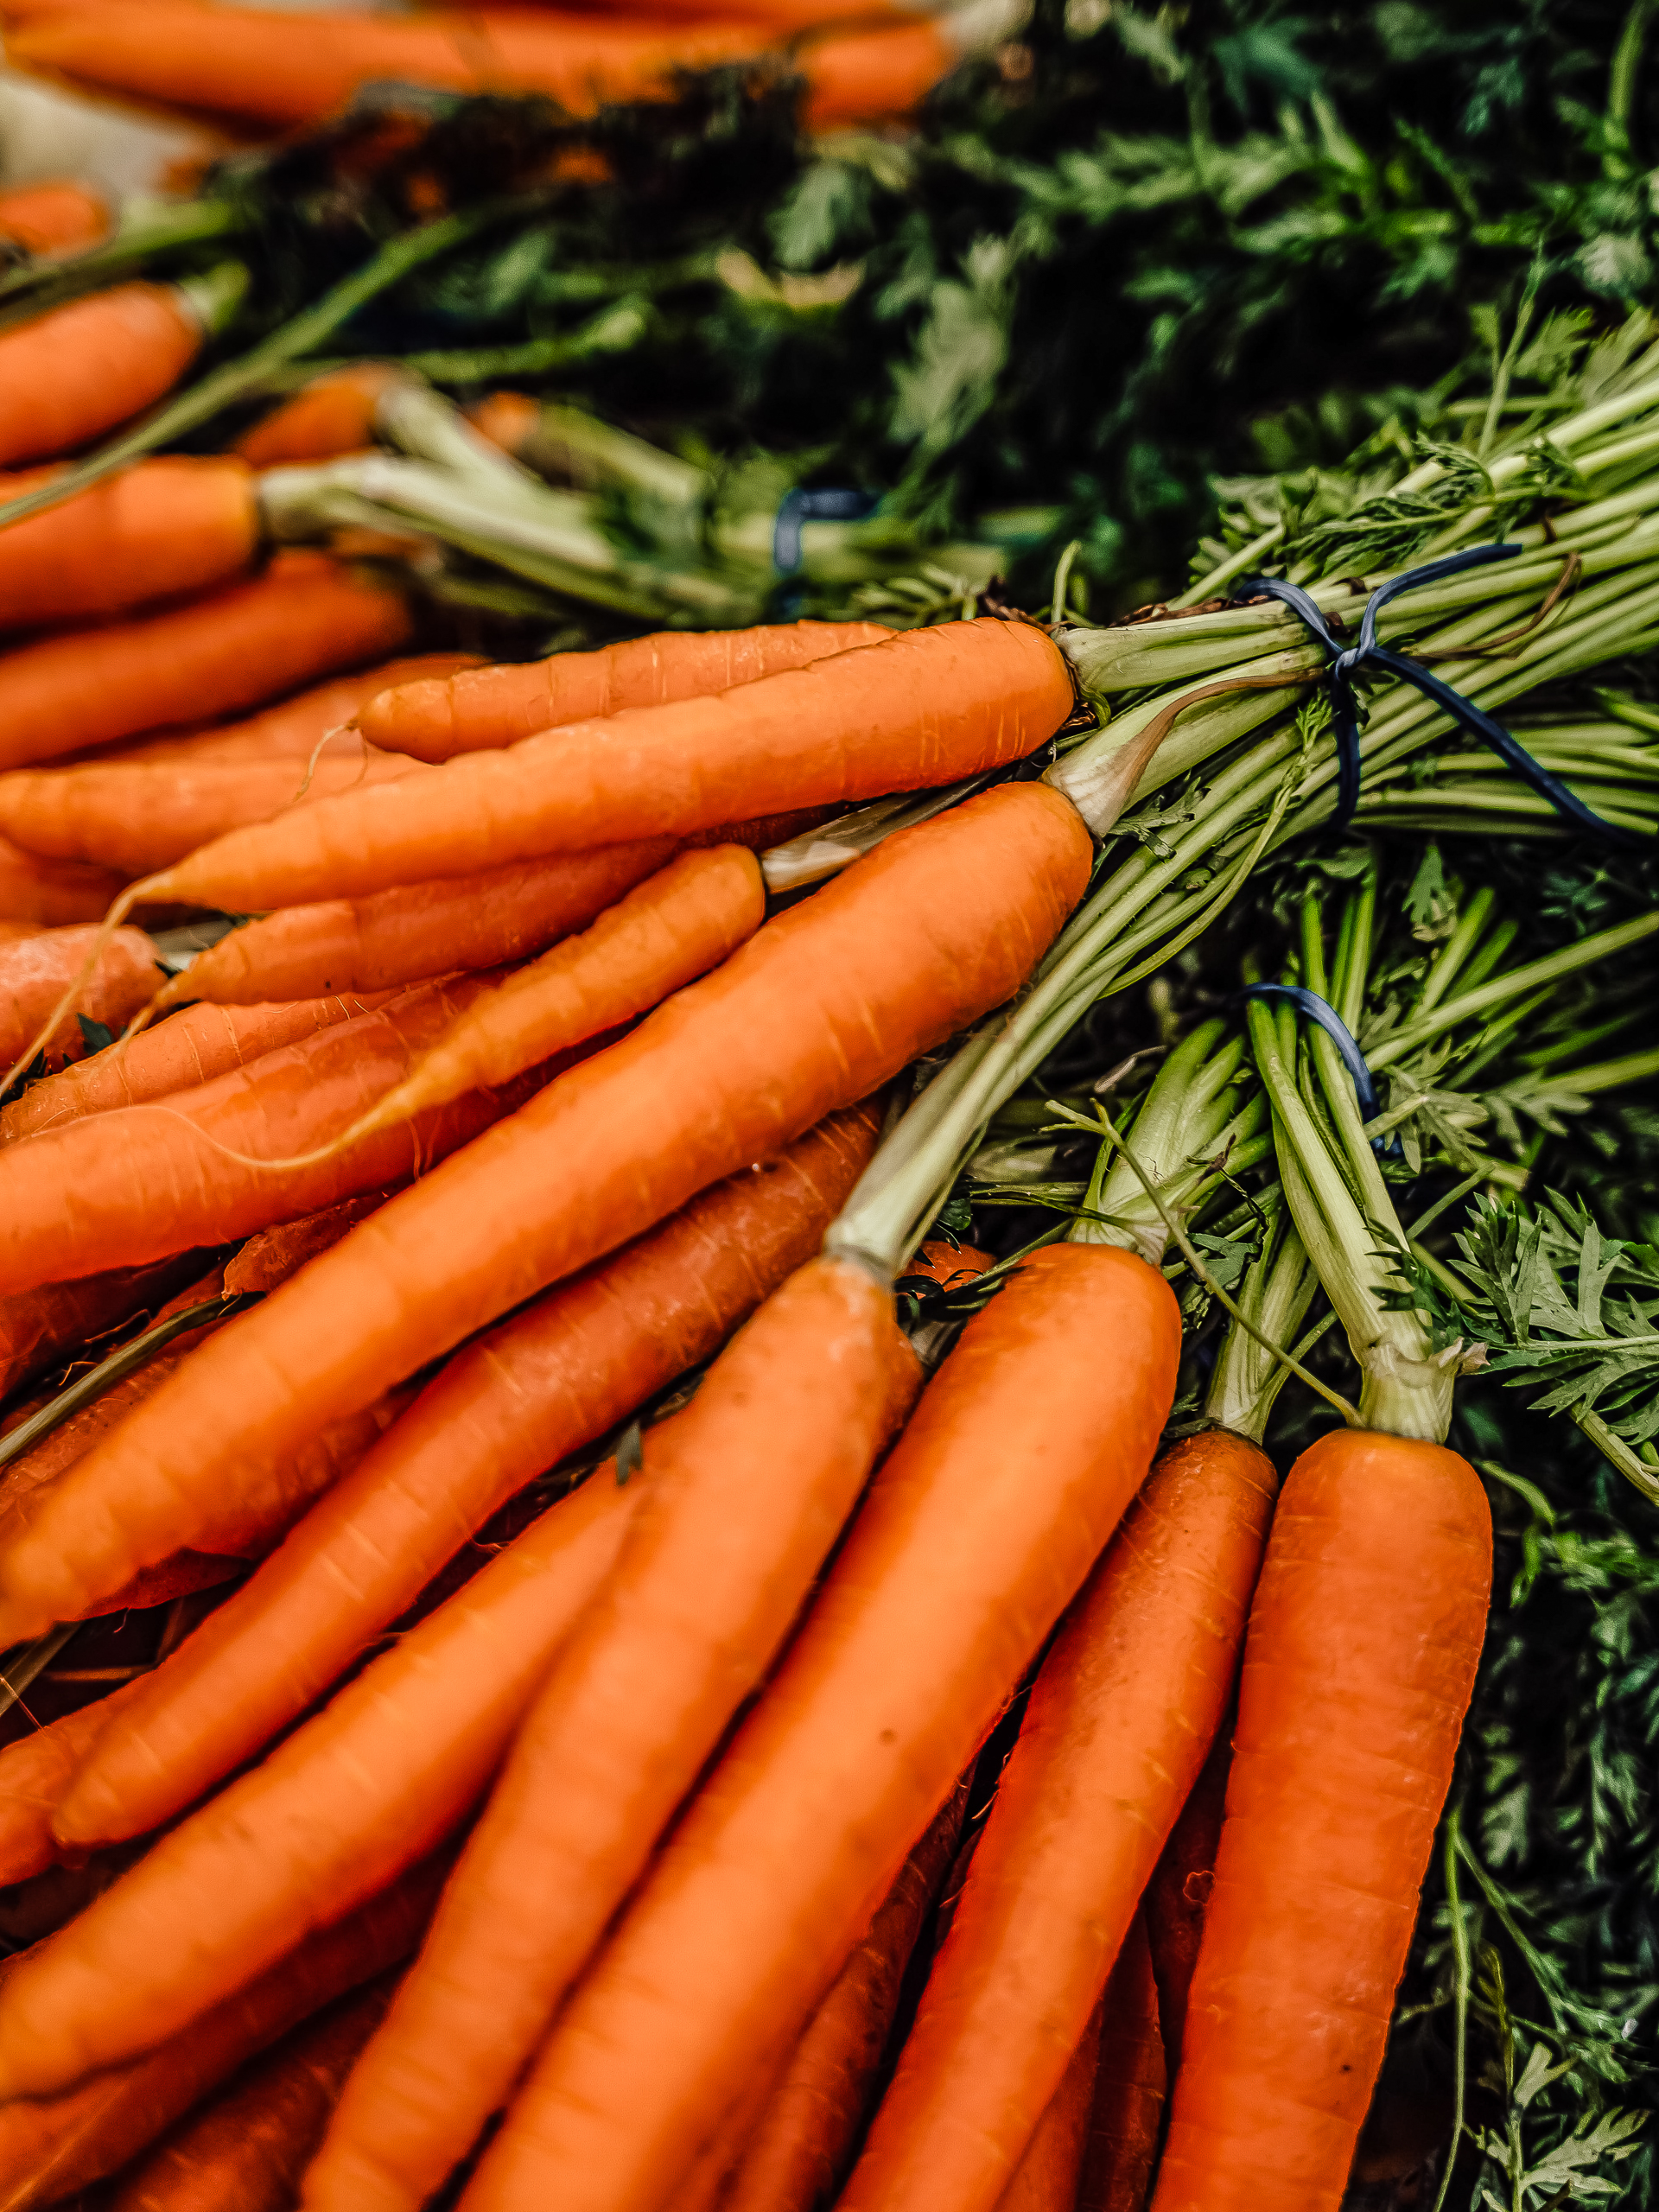 5 Health Benefits of Eating Carrots